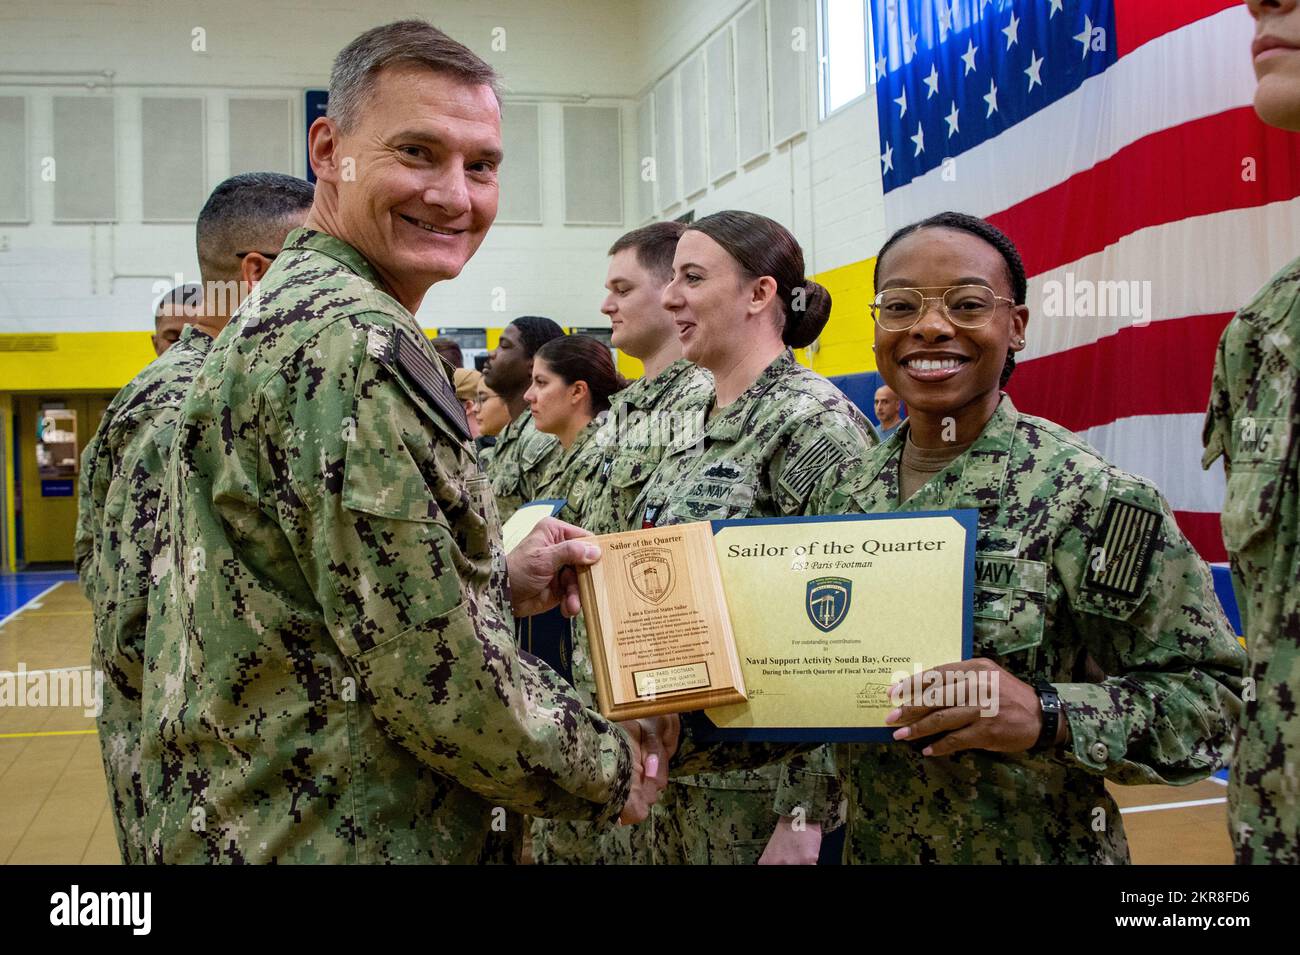 NAVAL SUPPORT ACTIVITY SOUDA BAY, Greece (Nov. 10, 2022) Capt. Odin Klug, commanding officer, Naval Support Activity (NSA) Souda Bay, Greece, recognizes Logistics Specialist 2nd Class Paris Footman as NSA Souda Bay’s Sailor of the Quarter for the fourth quarter of Fiscal Year 2022 during an awards ceremony on Nov. 10, 2022. NSA Souda Bay is an operational ashore installation which enables and supports U.S., Allied, Coalition, and Partner nation forces to preserve security and stability in the European, African, and Central Command areas of responsibility. Stock Photo